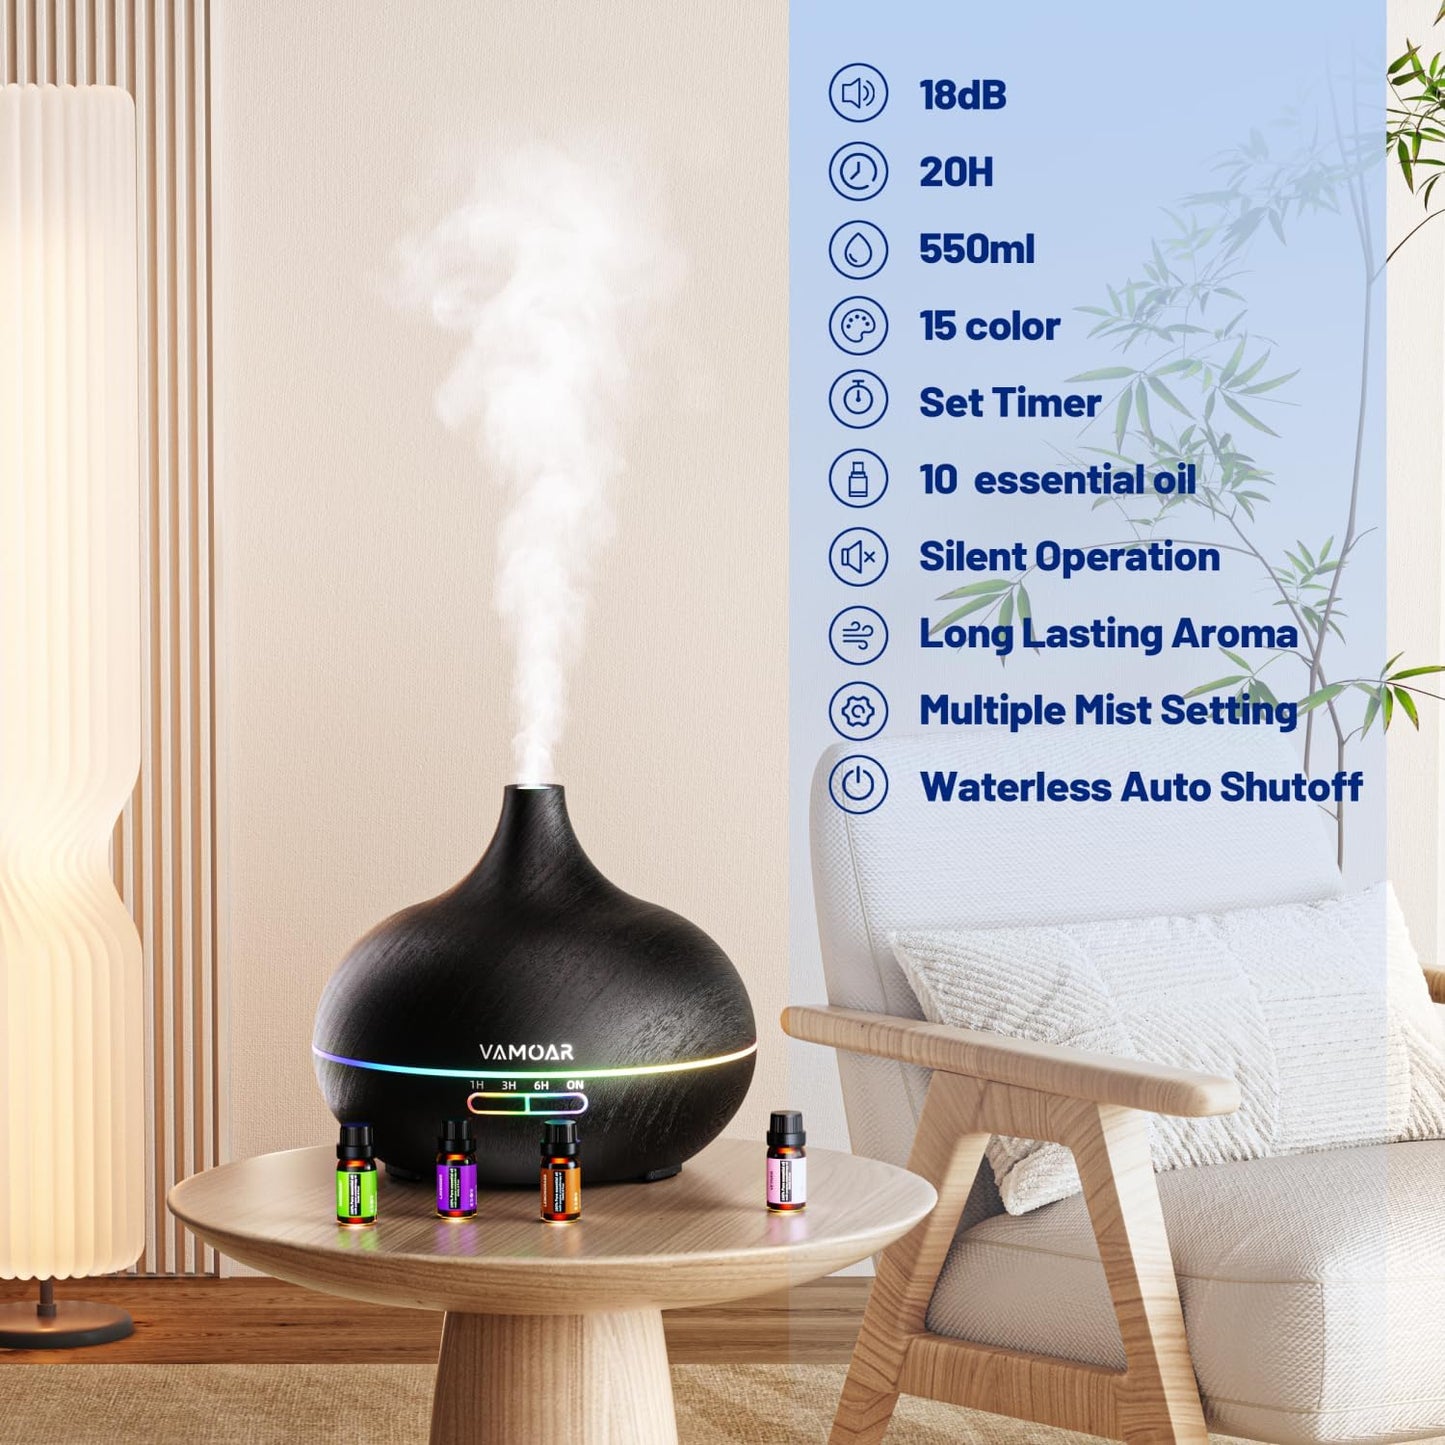 Essential Oil Diffuser Gift Set,Top 10 Pure Essential Oils,550Ml Diffuser & Diffuser Humidifier with 4 Timer &Auto Shut-Off for & 15 Ambient Light Settings